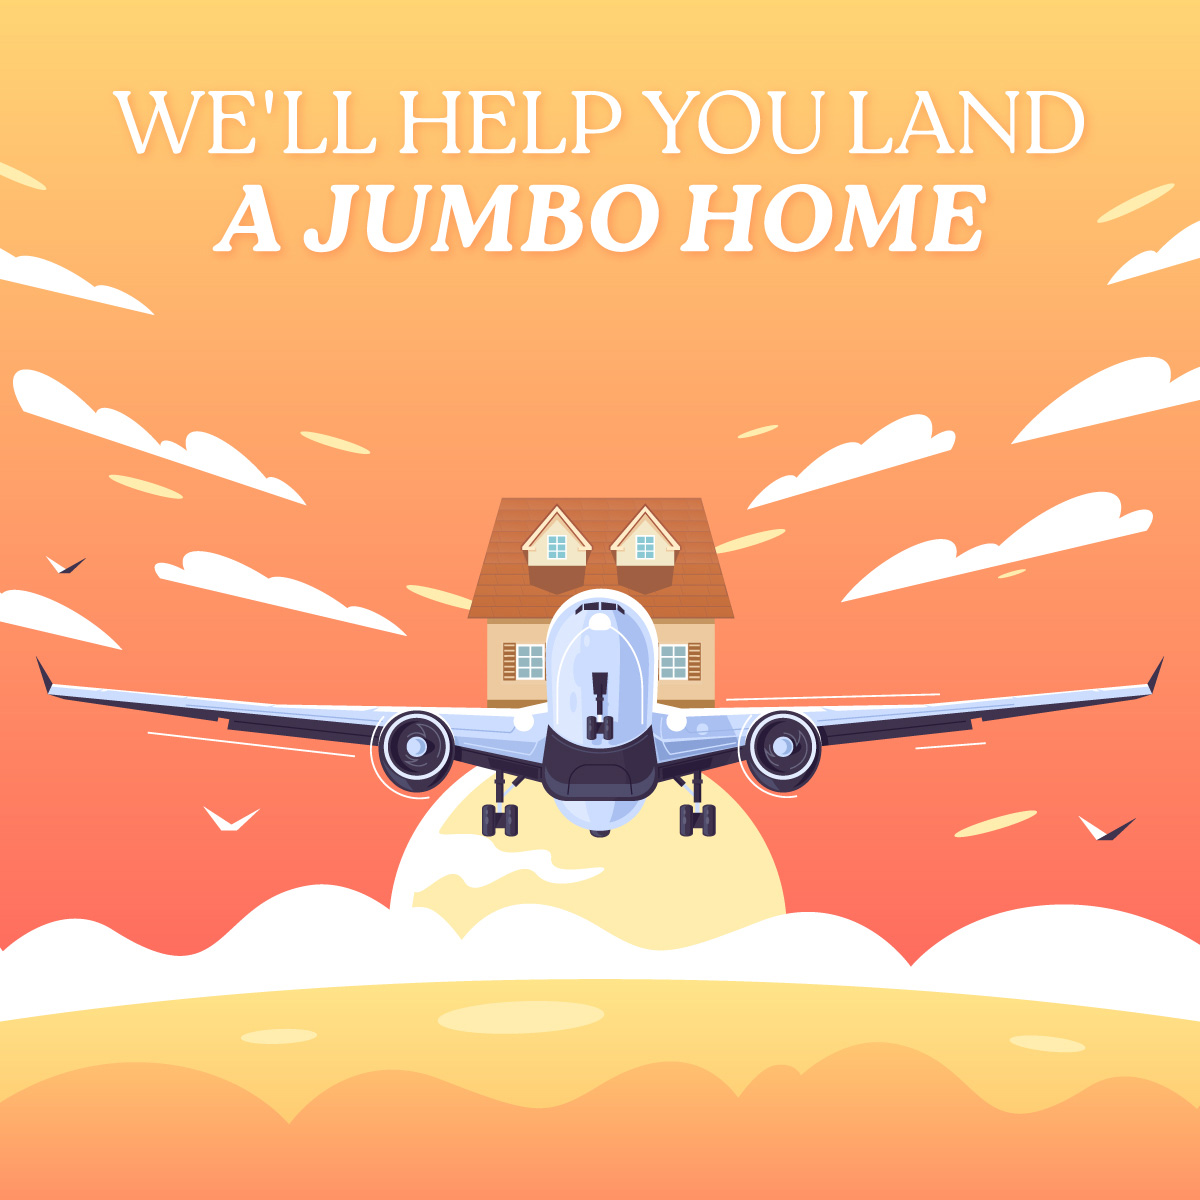 Are you ready to live large? We can help make your Jumbo mortgage dreams a reality. Don't settle for average - call us today! #JumboMortgage #DreamHome #LivingLarge 🏡💸🌟